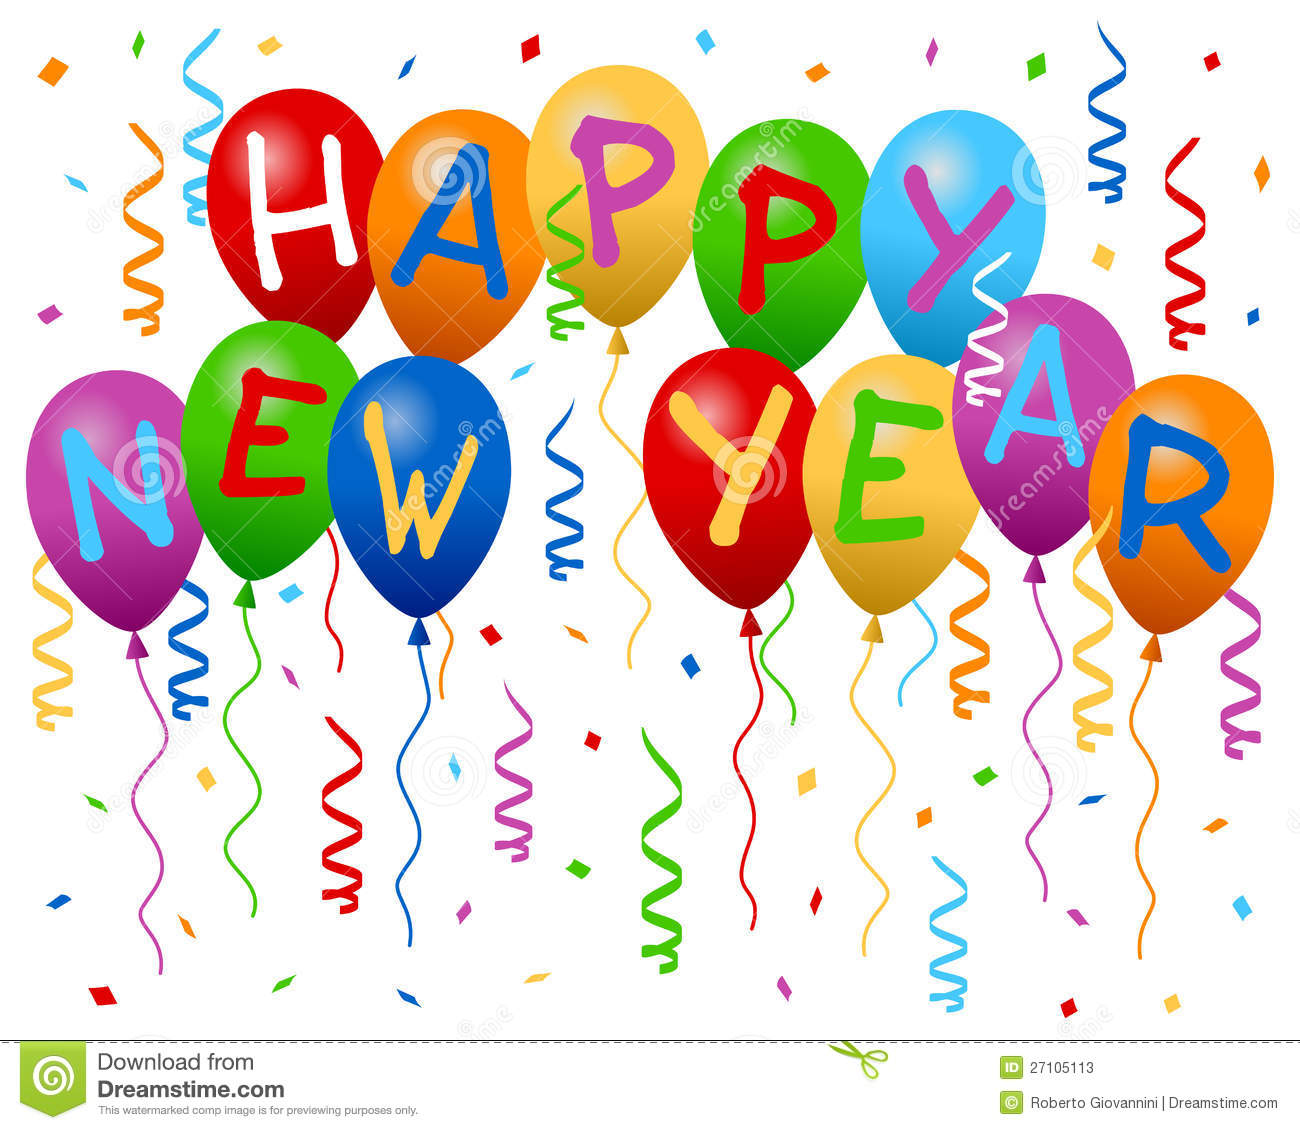 New year clip art images .